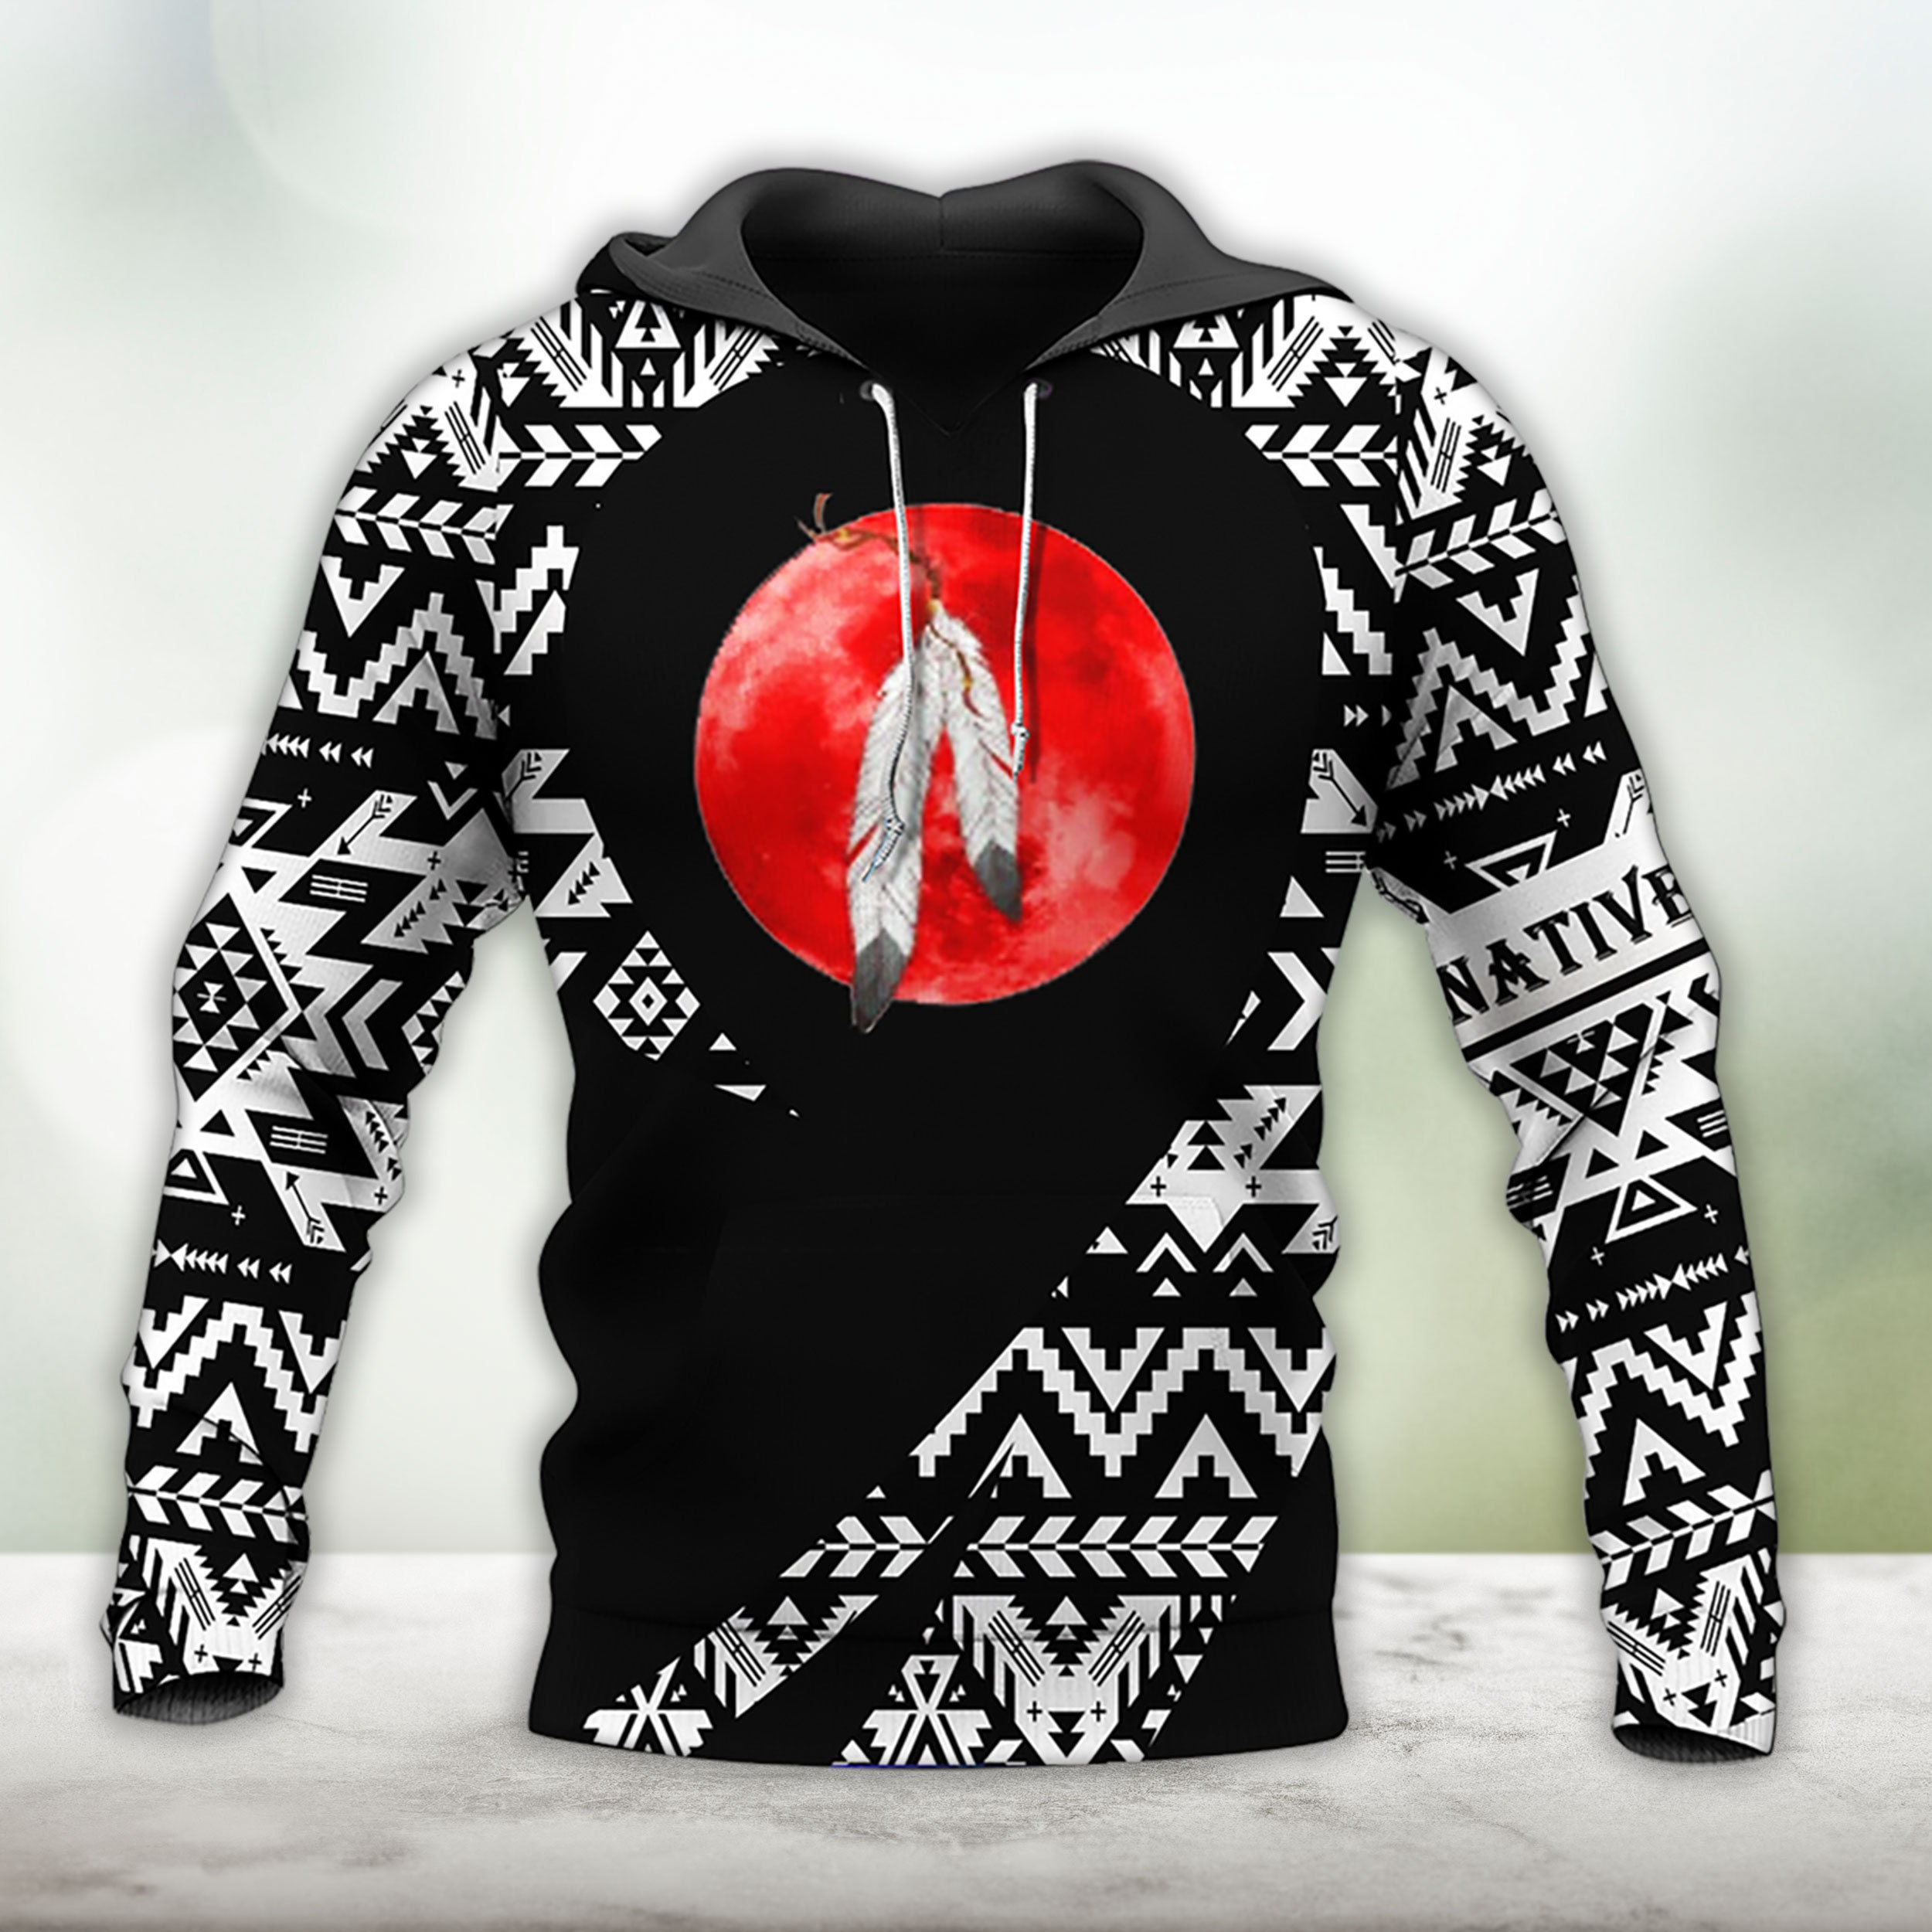 Discover Pattern Native Pride Native American 3D Allover Hoodie